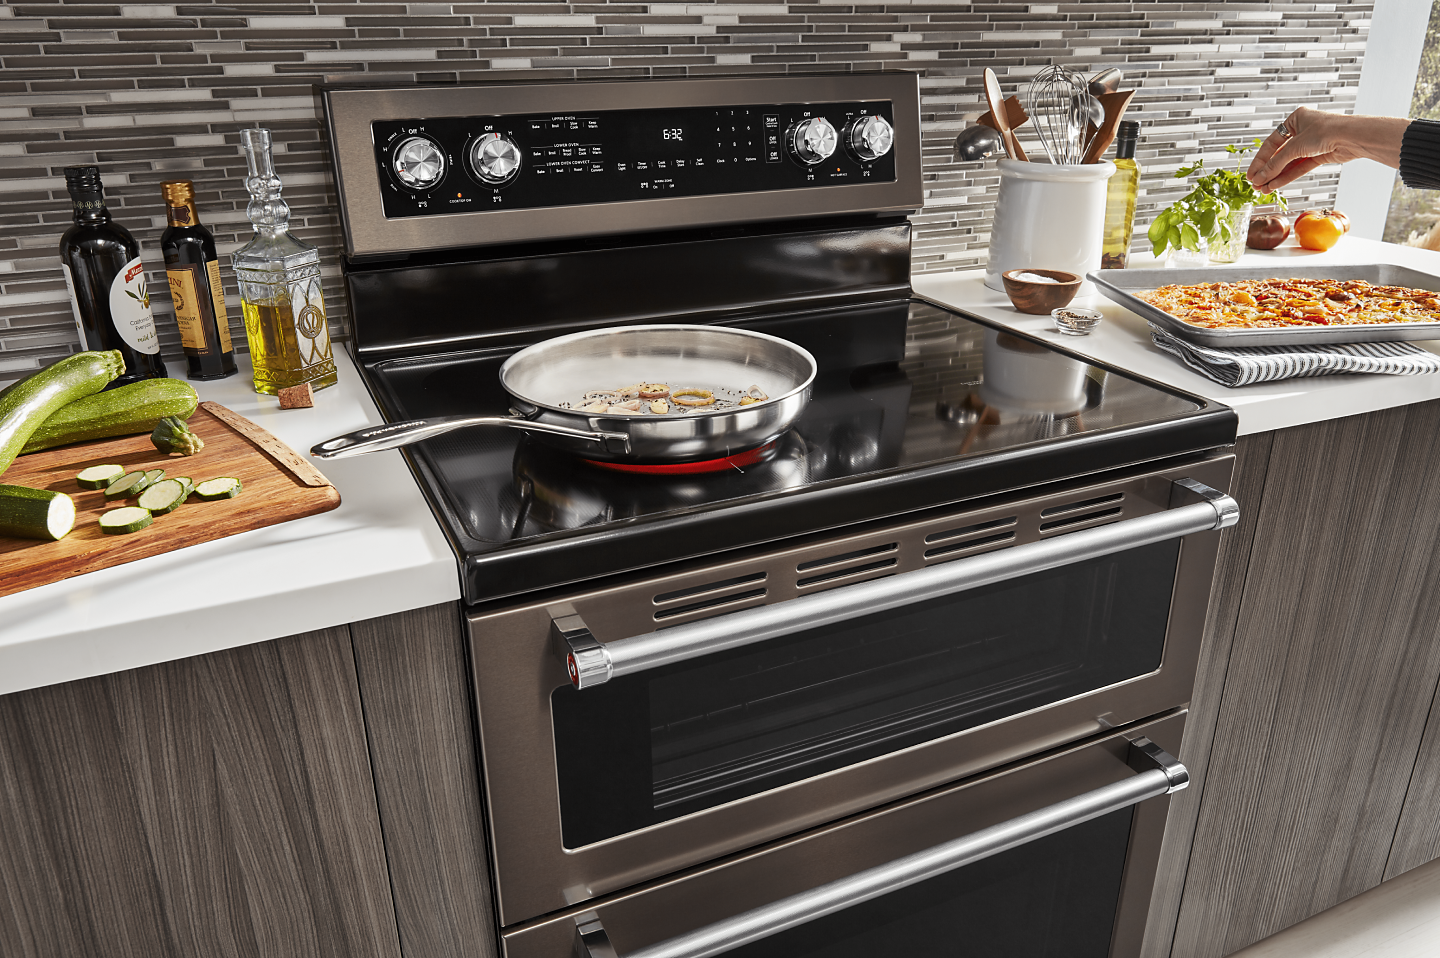 https://kitchenaid-h.assetsadobe.com/is/image/content/dam/business-unit/kitchenaid/en-us/marketing-content/site-assets/page-content/pinch-of-help/update-your-stove-from-gas-to-electric/Update-Gas-to-Electric-Stove_1X.png?fmt=png-alpha&qlt=85,0&resMode=sharp2&op_usm=1.75,0.3,2,0&scl=1&constrain=fit,1